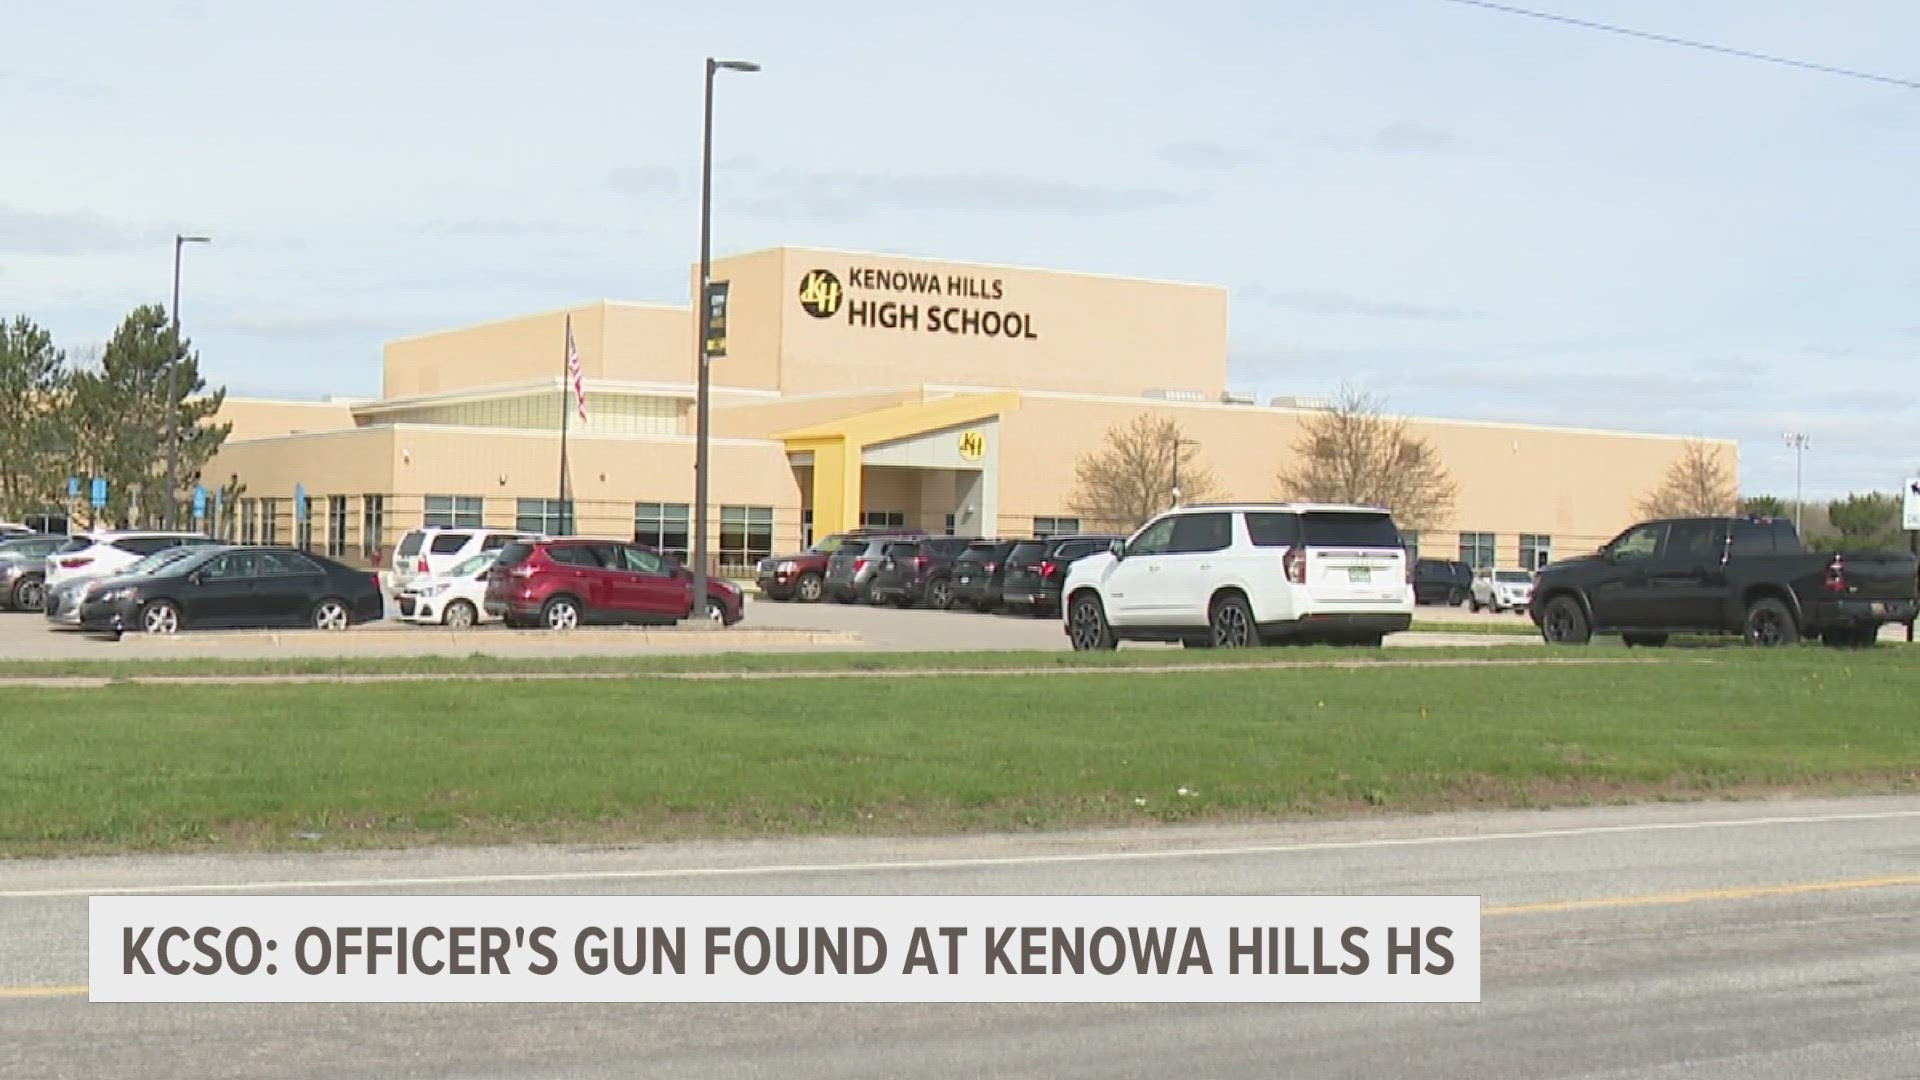 The handgun was discovered in the bathroom after school hours by two students who quickly told school staff.